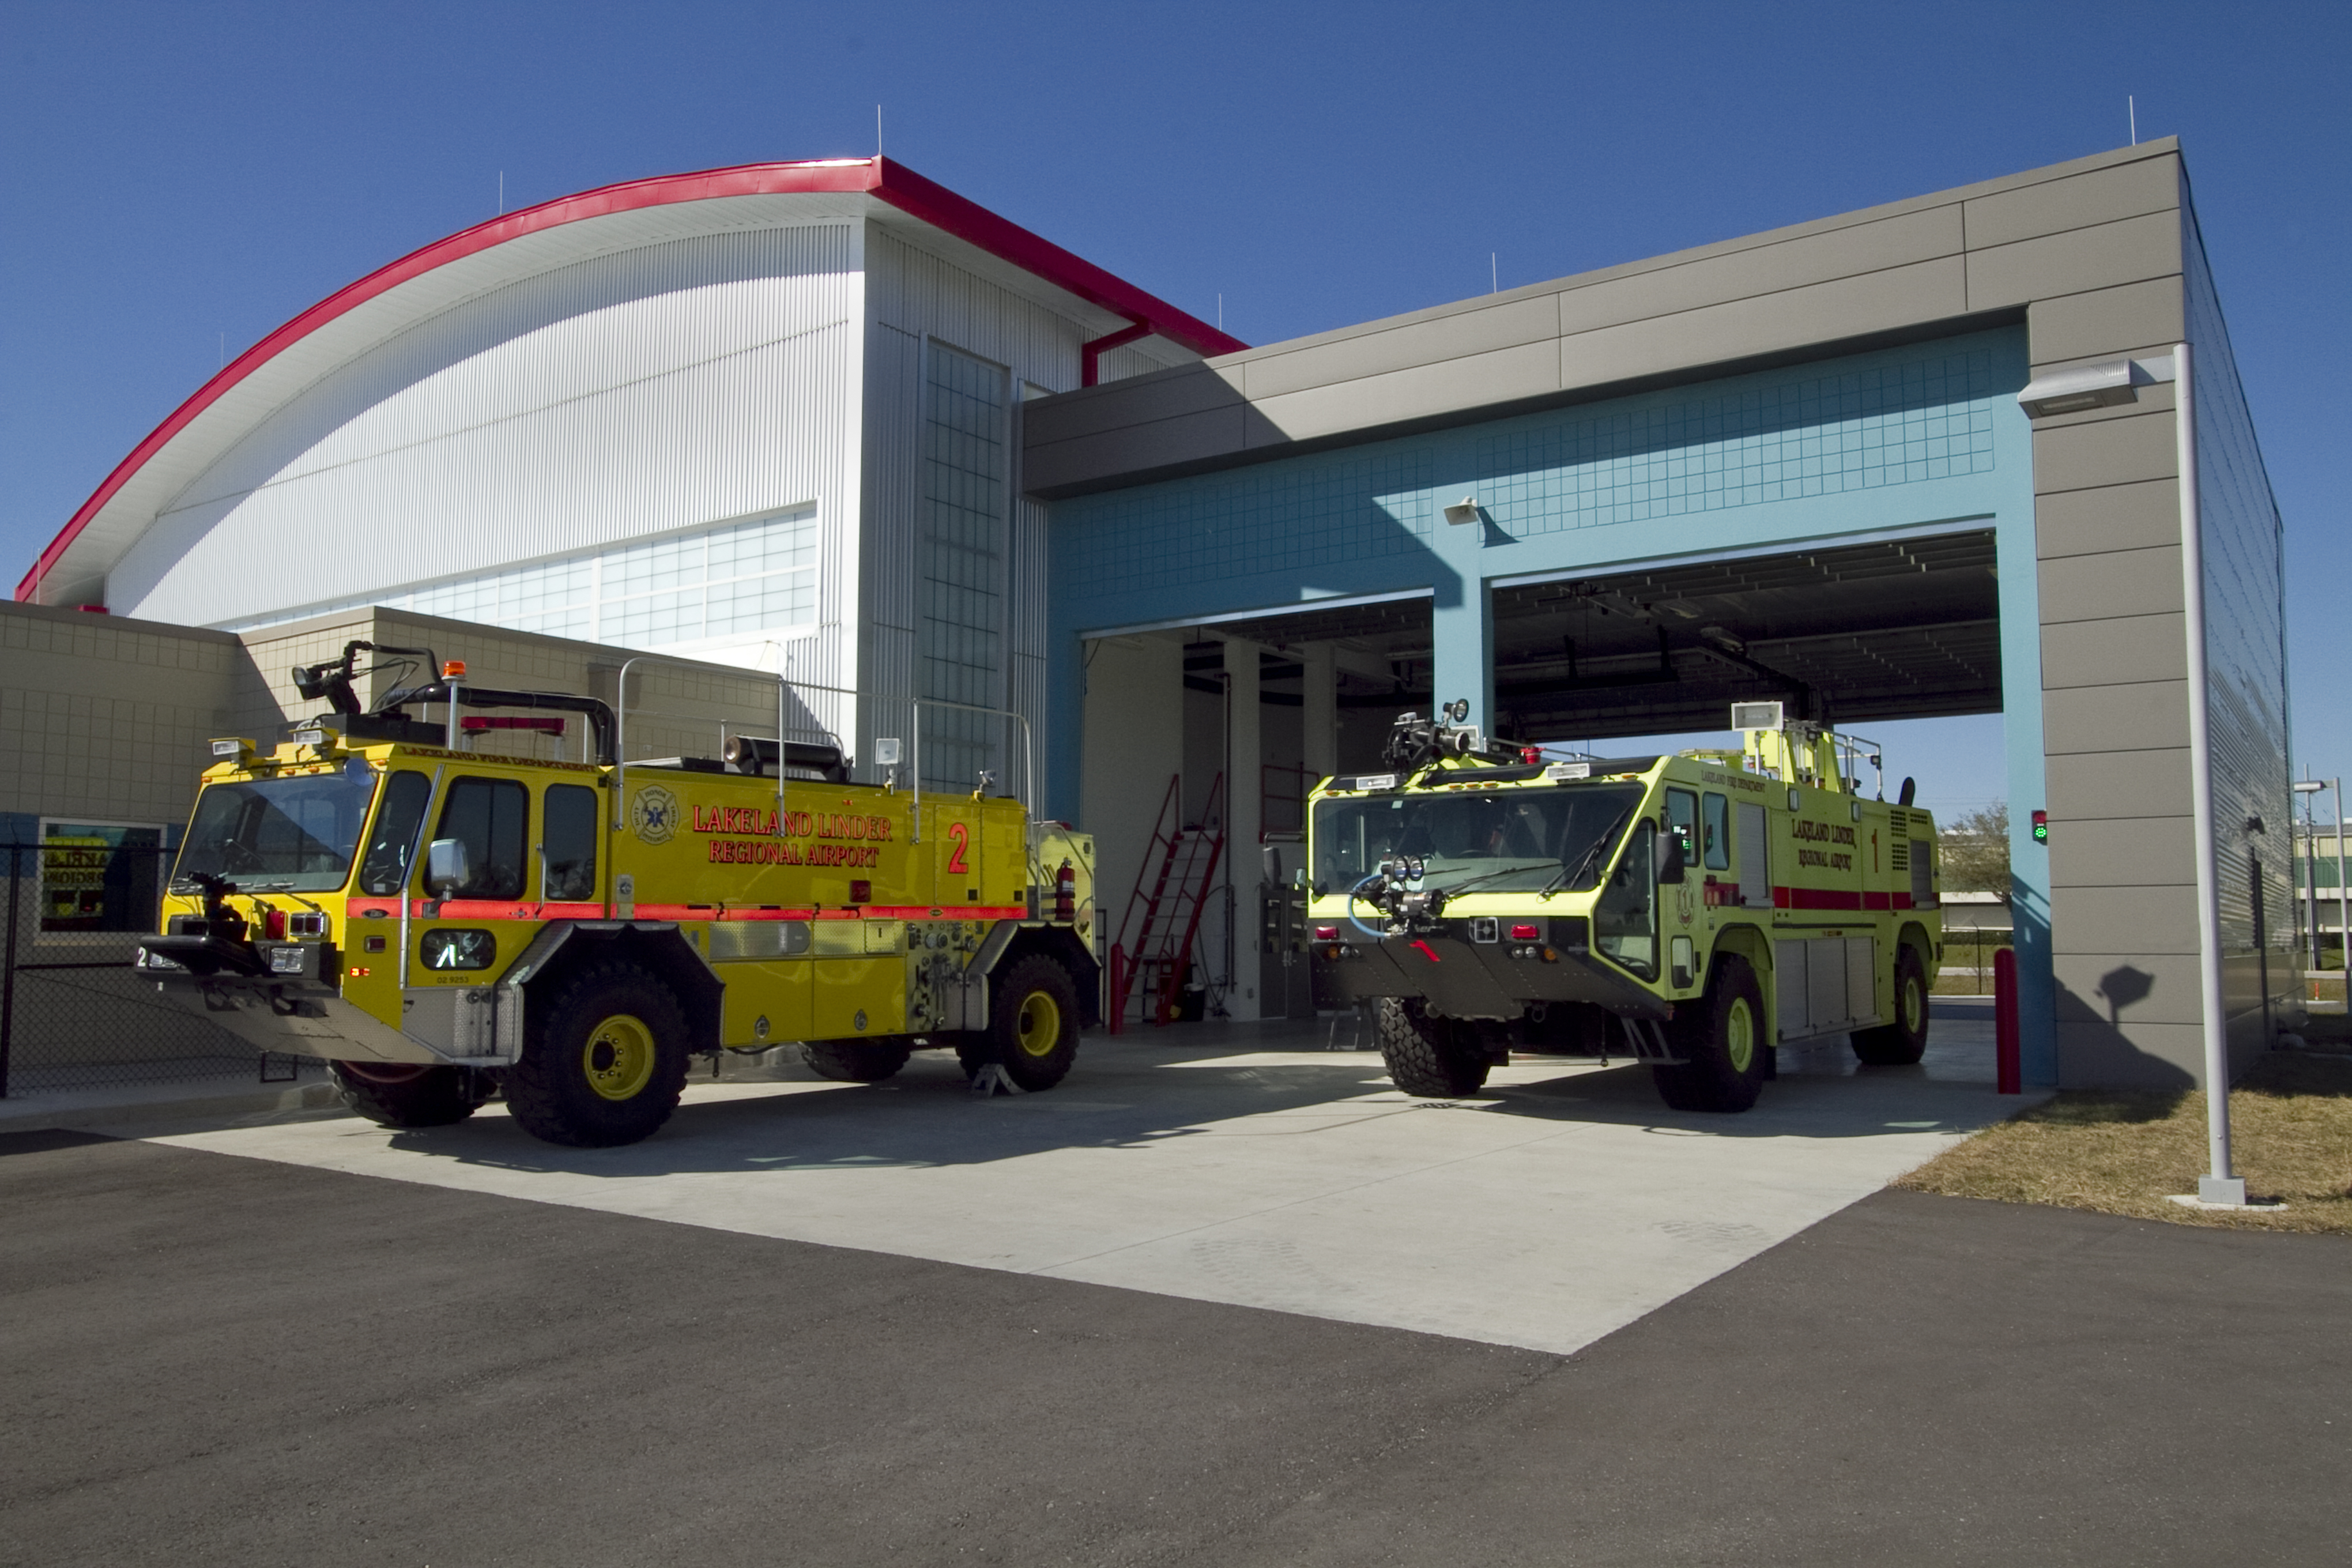 A picture of the department's two ARFF trucks.